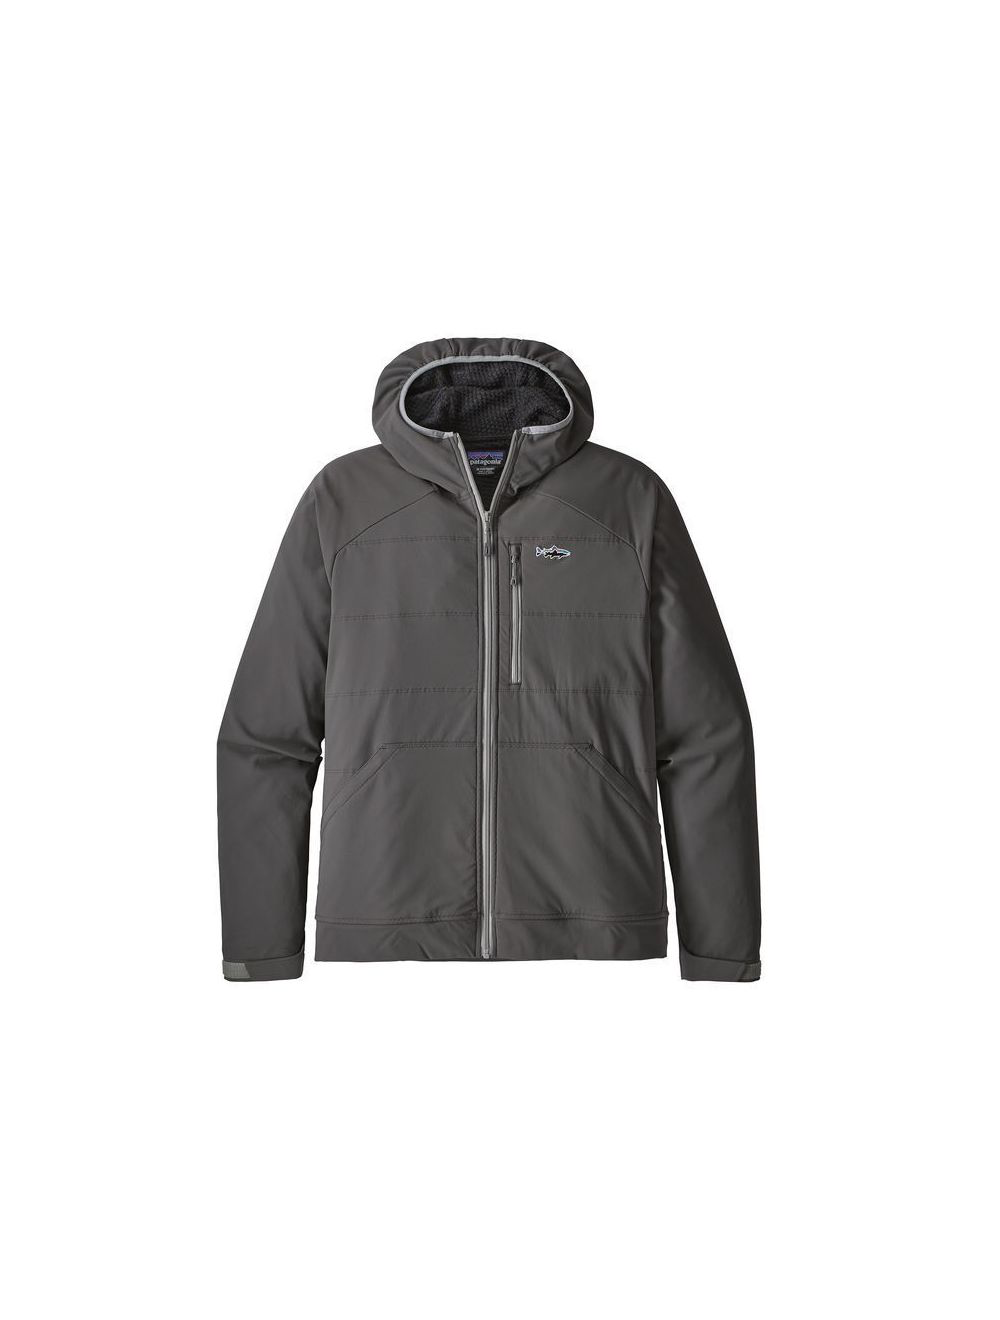 Patagonia M's Snap-Dry Hoody - Forge Grey - XL